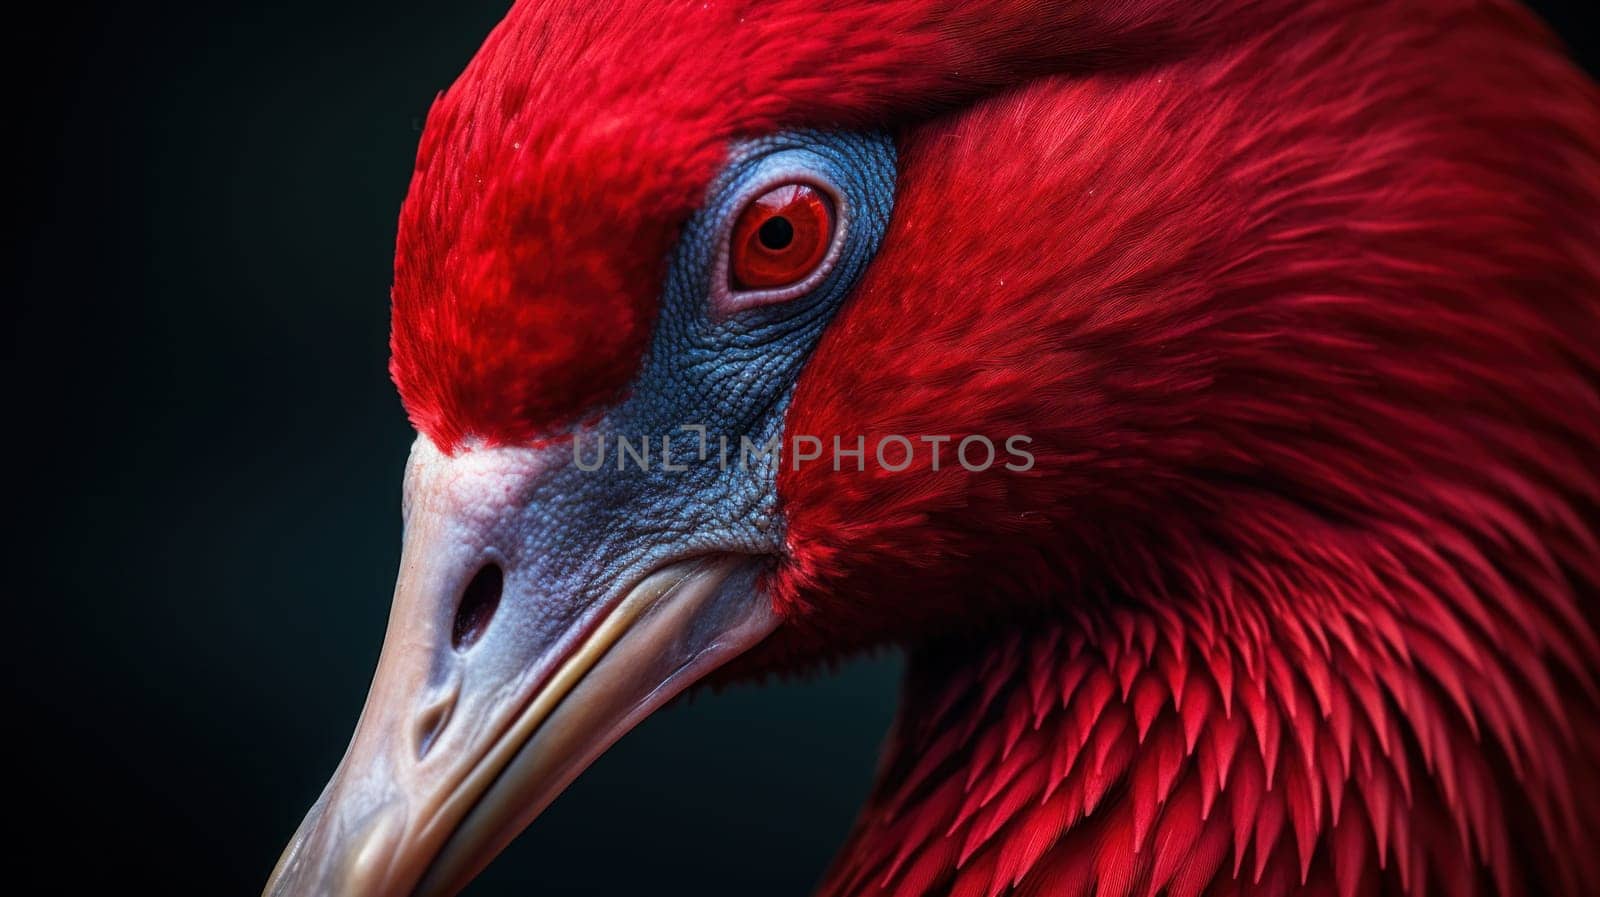 A close up of a red bird with blue eyes and feathers